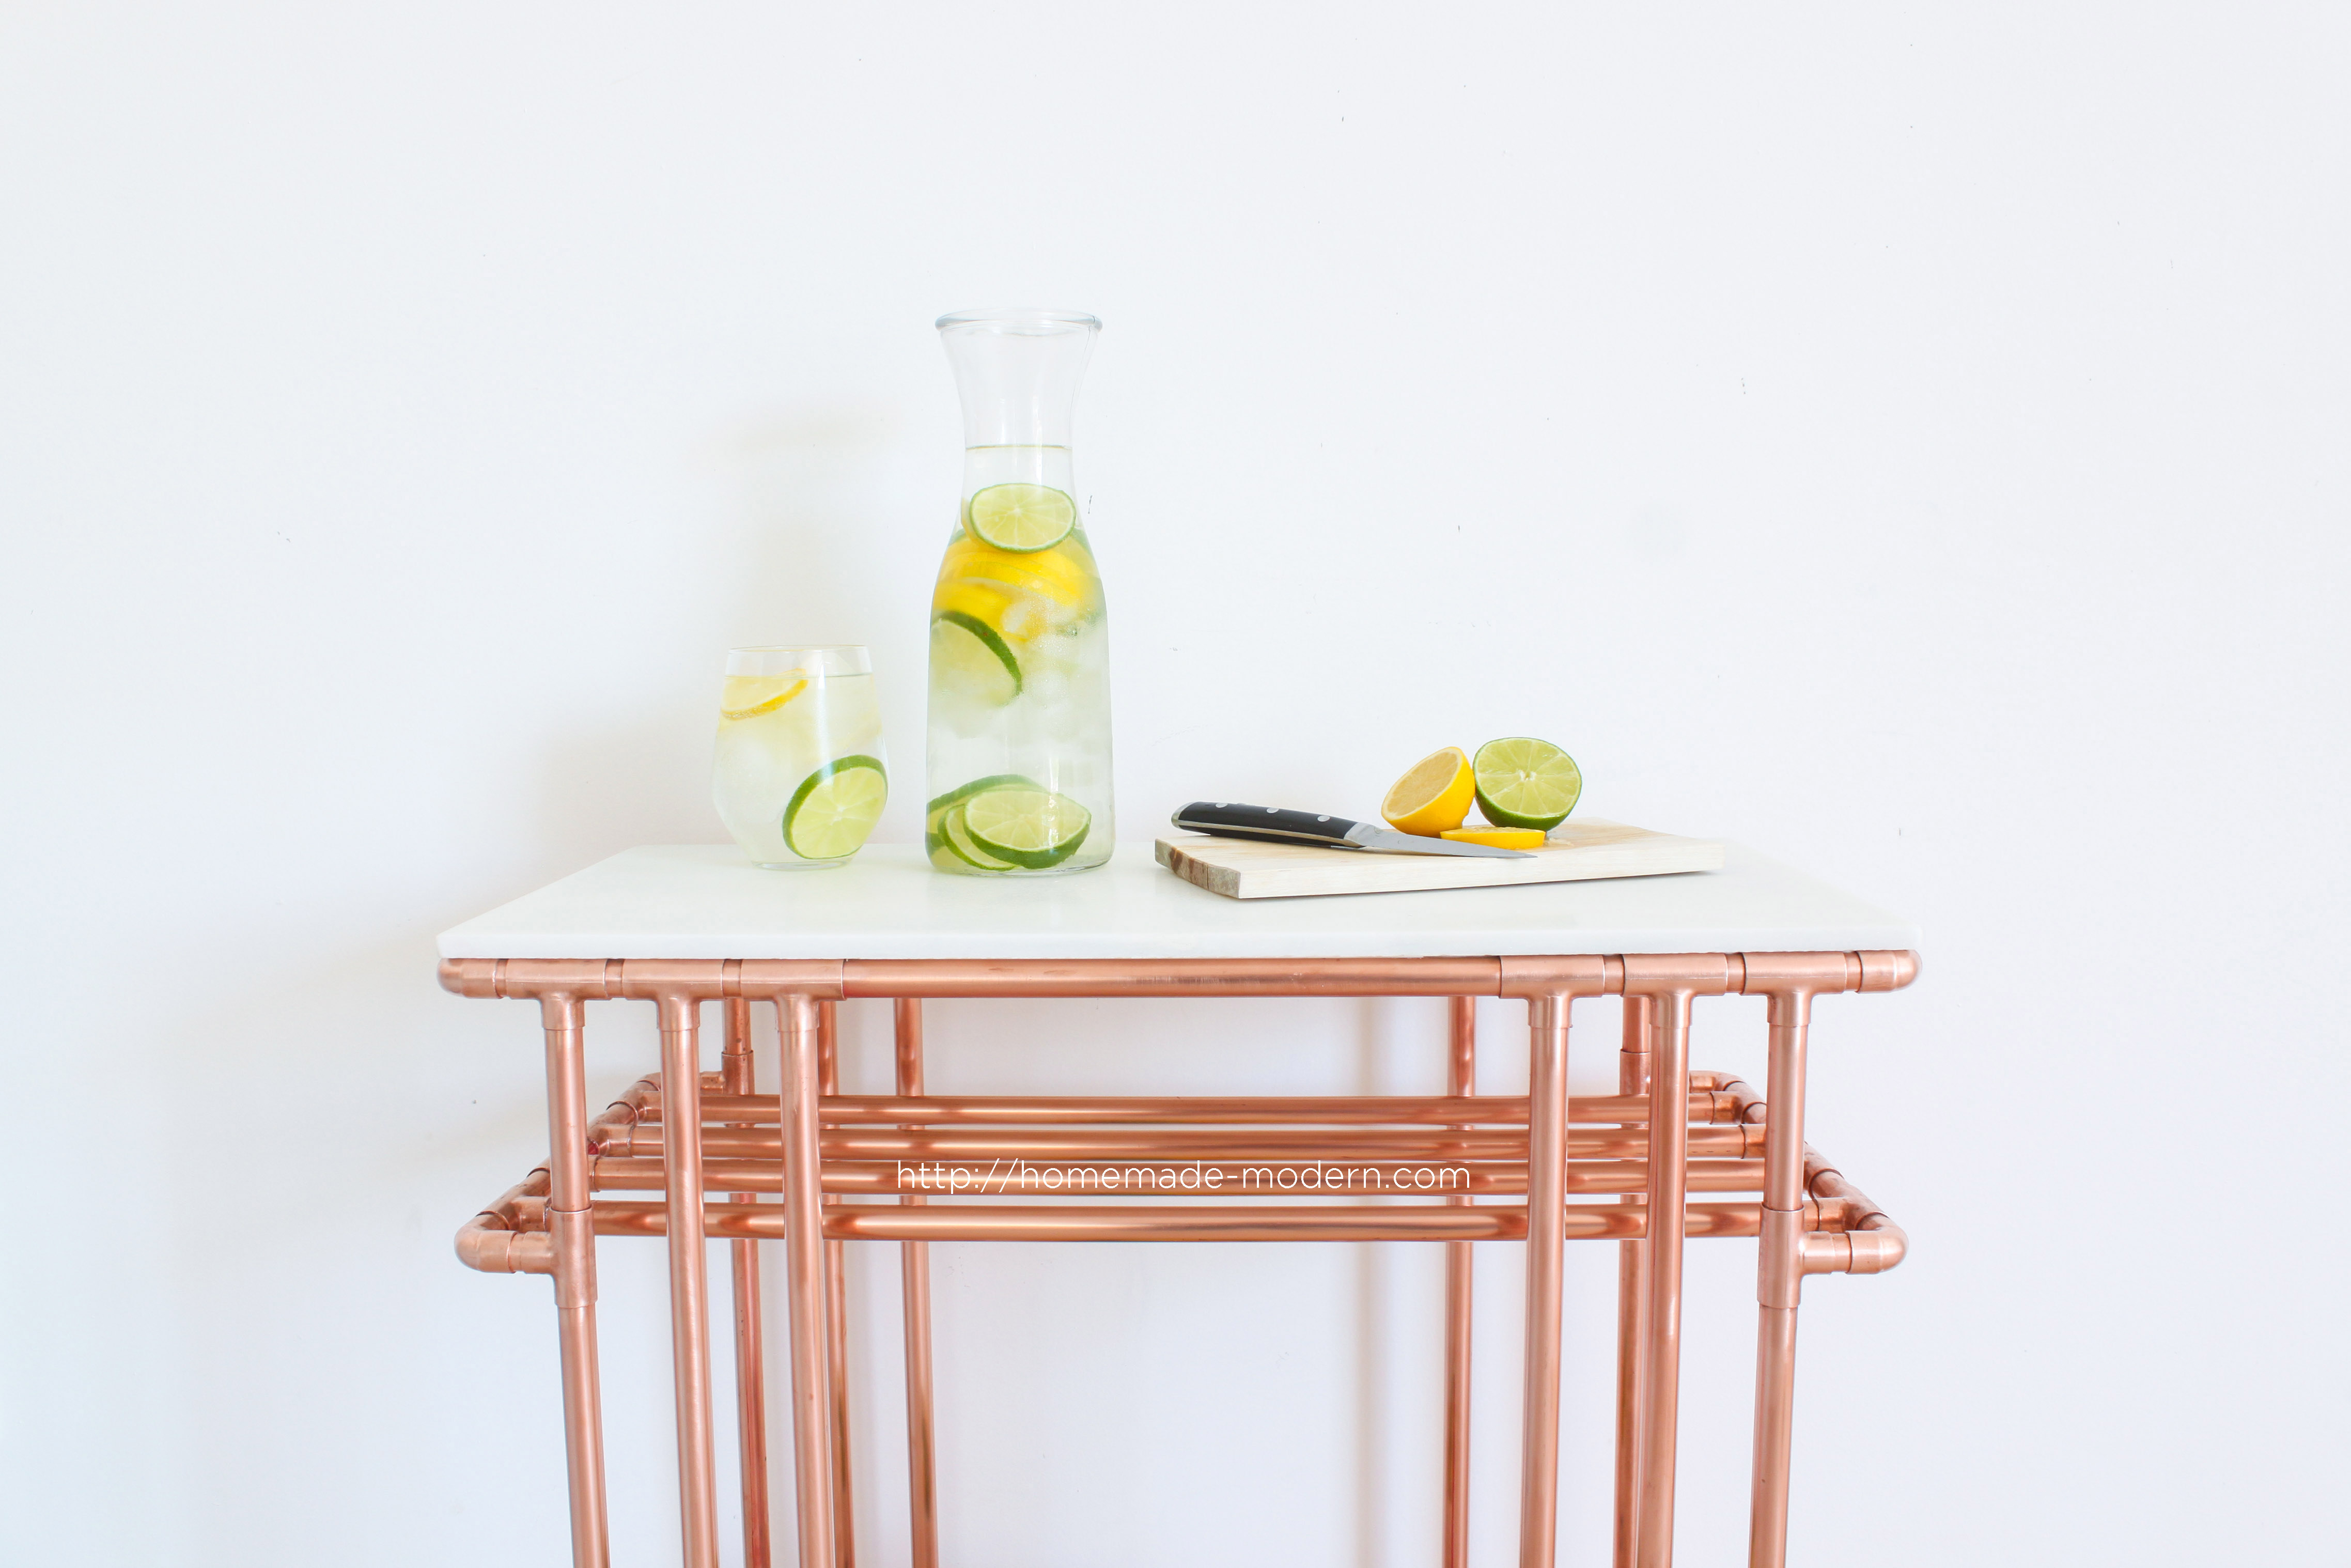 This DIY Copper Wine Bar is made entirely out of material from The Home Depot. Full instructions can be found at HomeMade-Modern.com